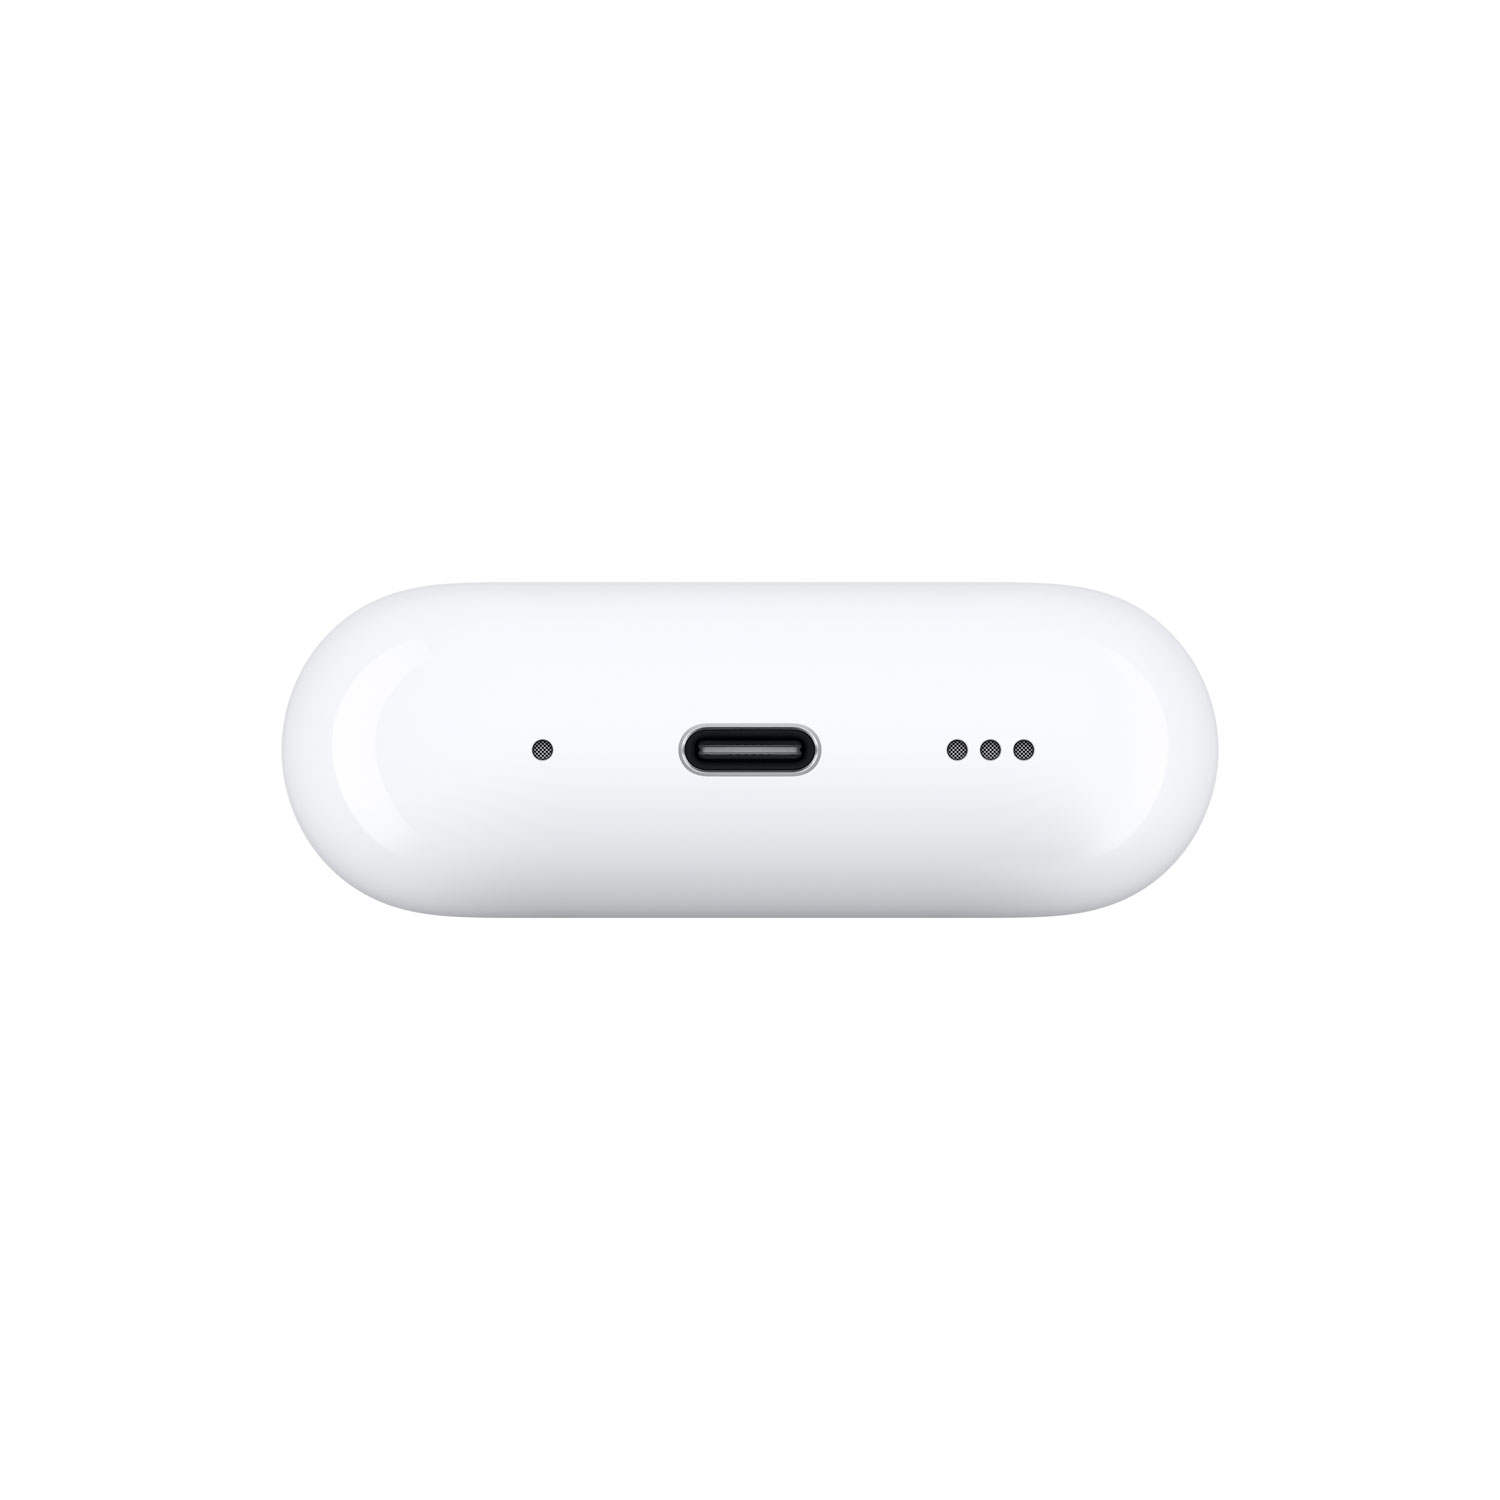 Apple AirPods Pro (2nd generation) Noise Cancelling True Wireless